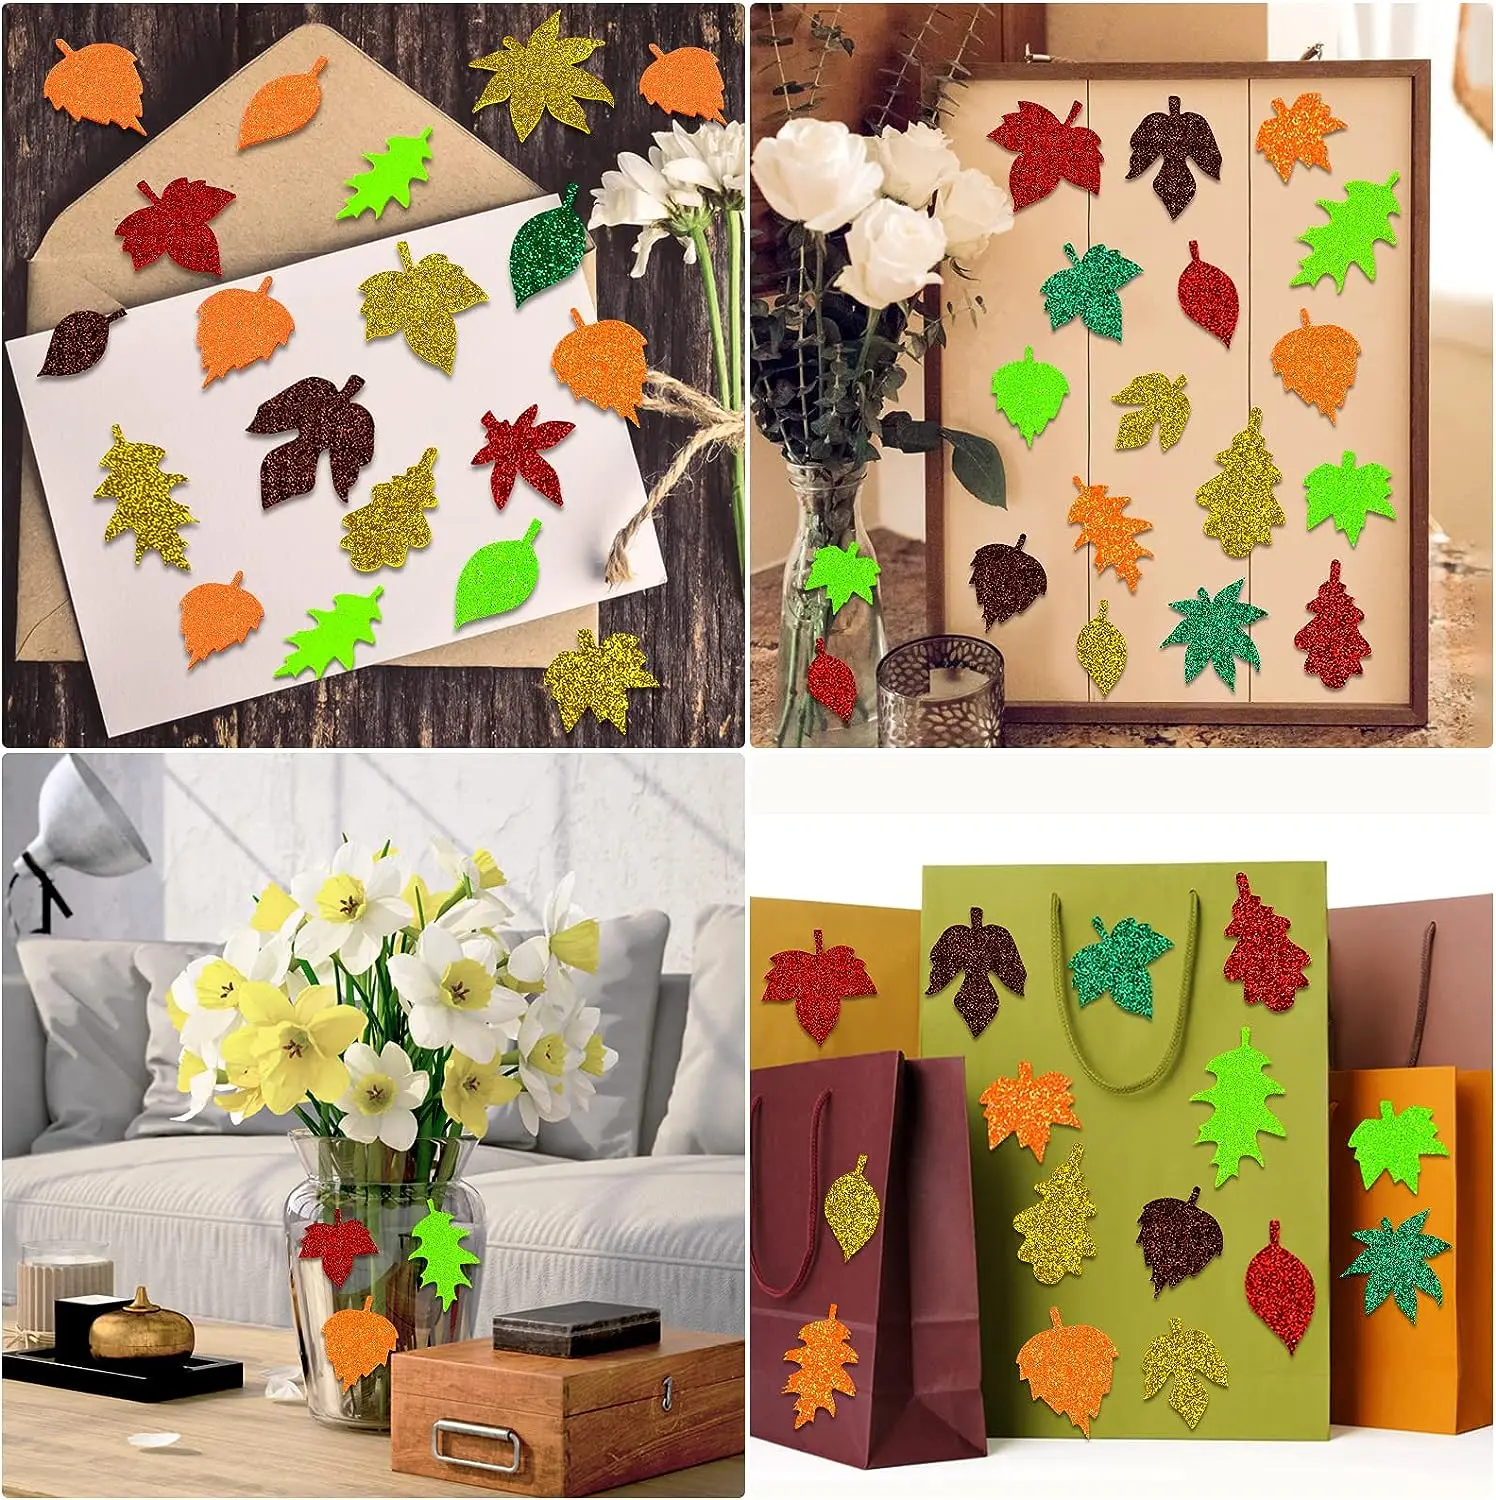 Leaf Glitter Stickers Fall Maple Leaf Foam Sticker for Autumn Thanksgiving  Halloween Party Craft 500 Pcs